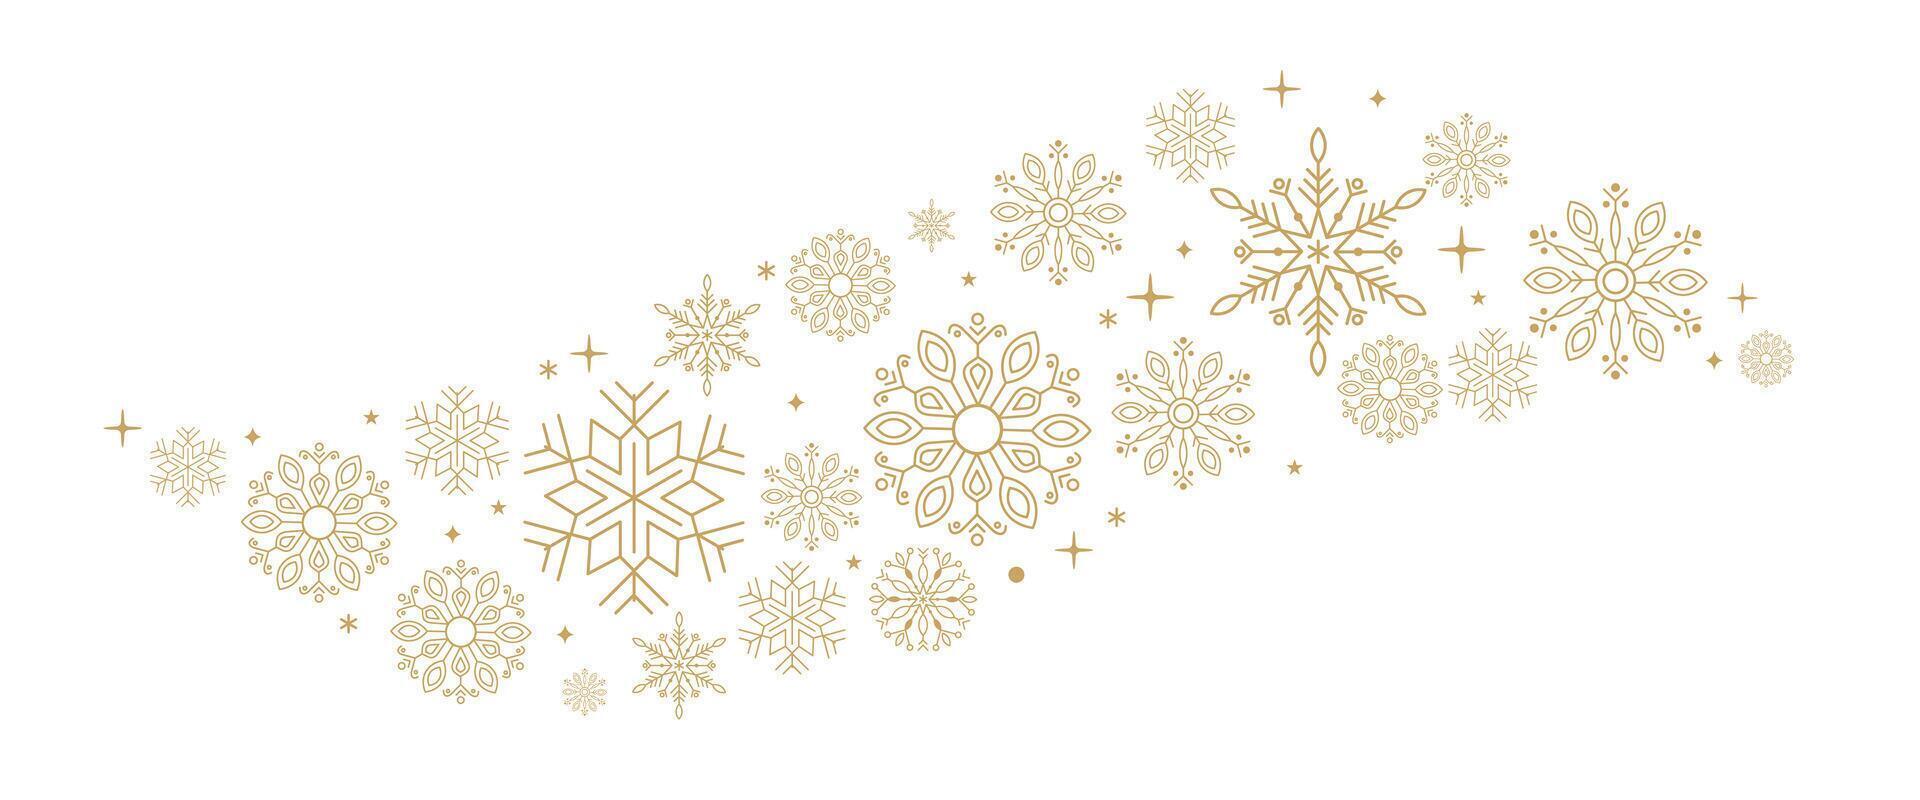 Christmas golden snowflakes and stars border isolated on white background vector